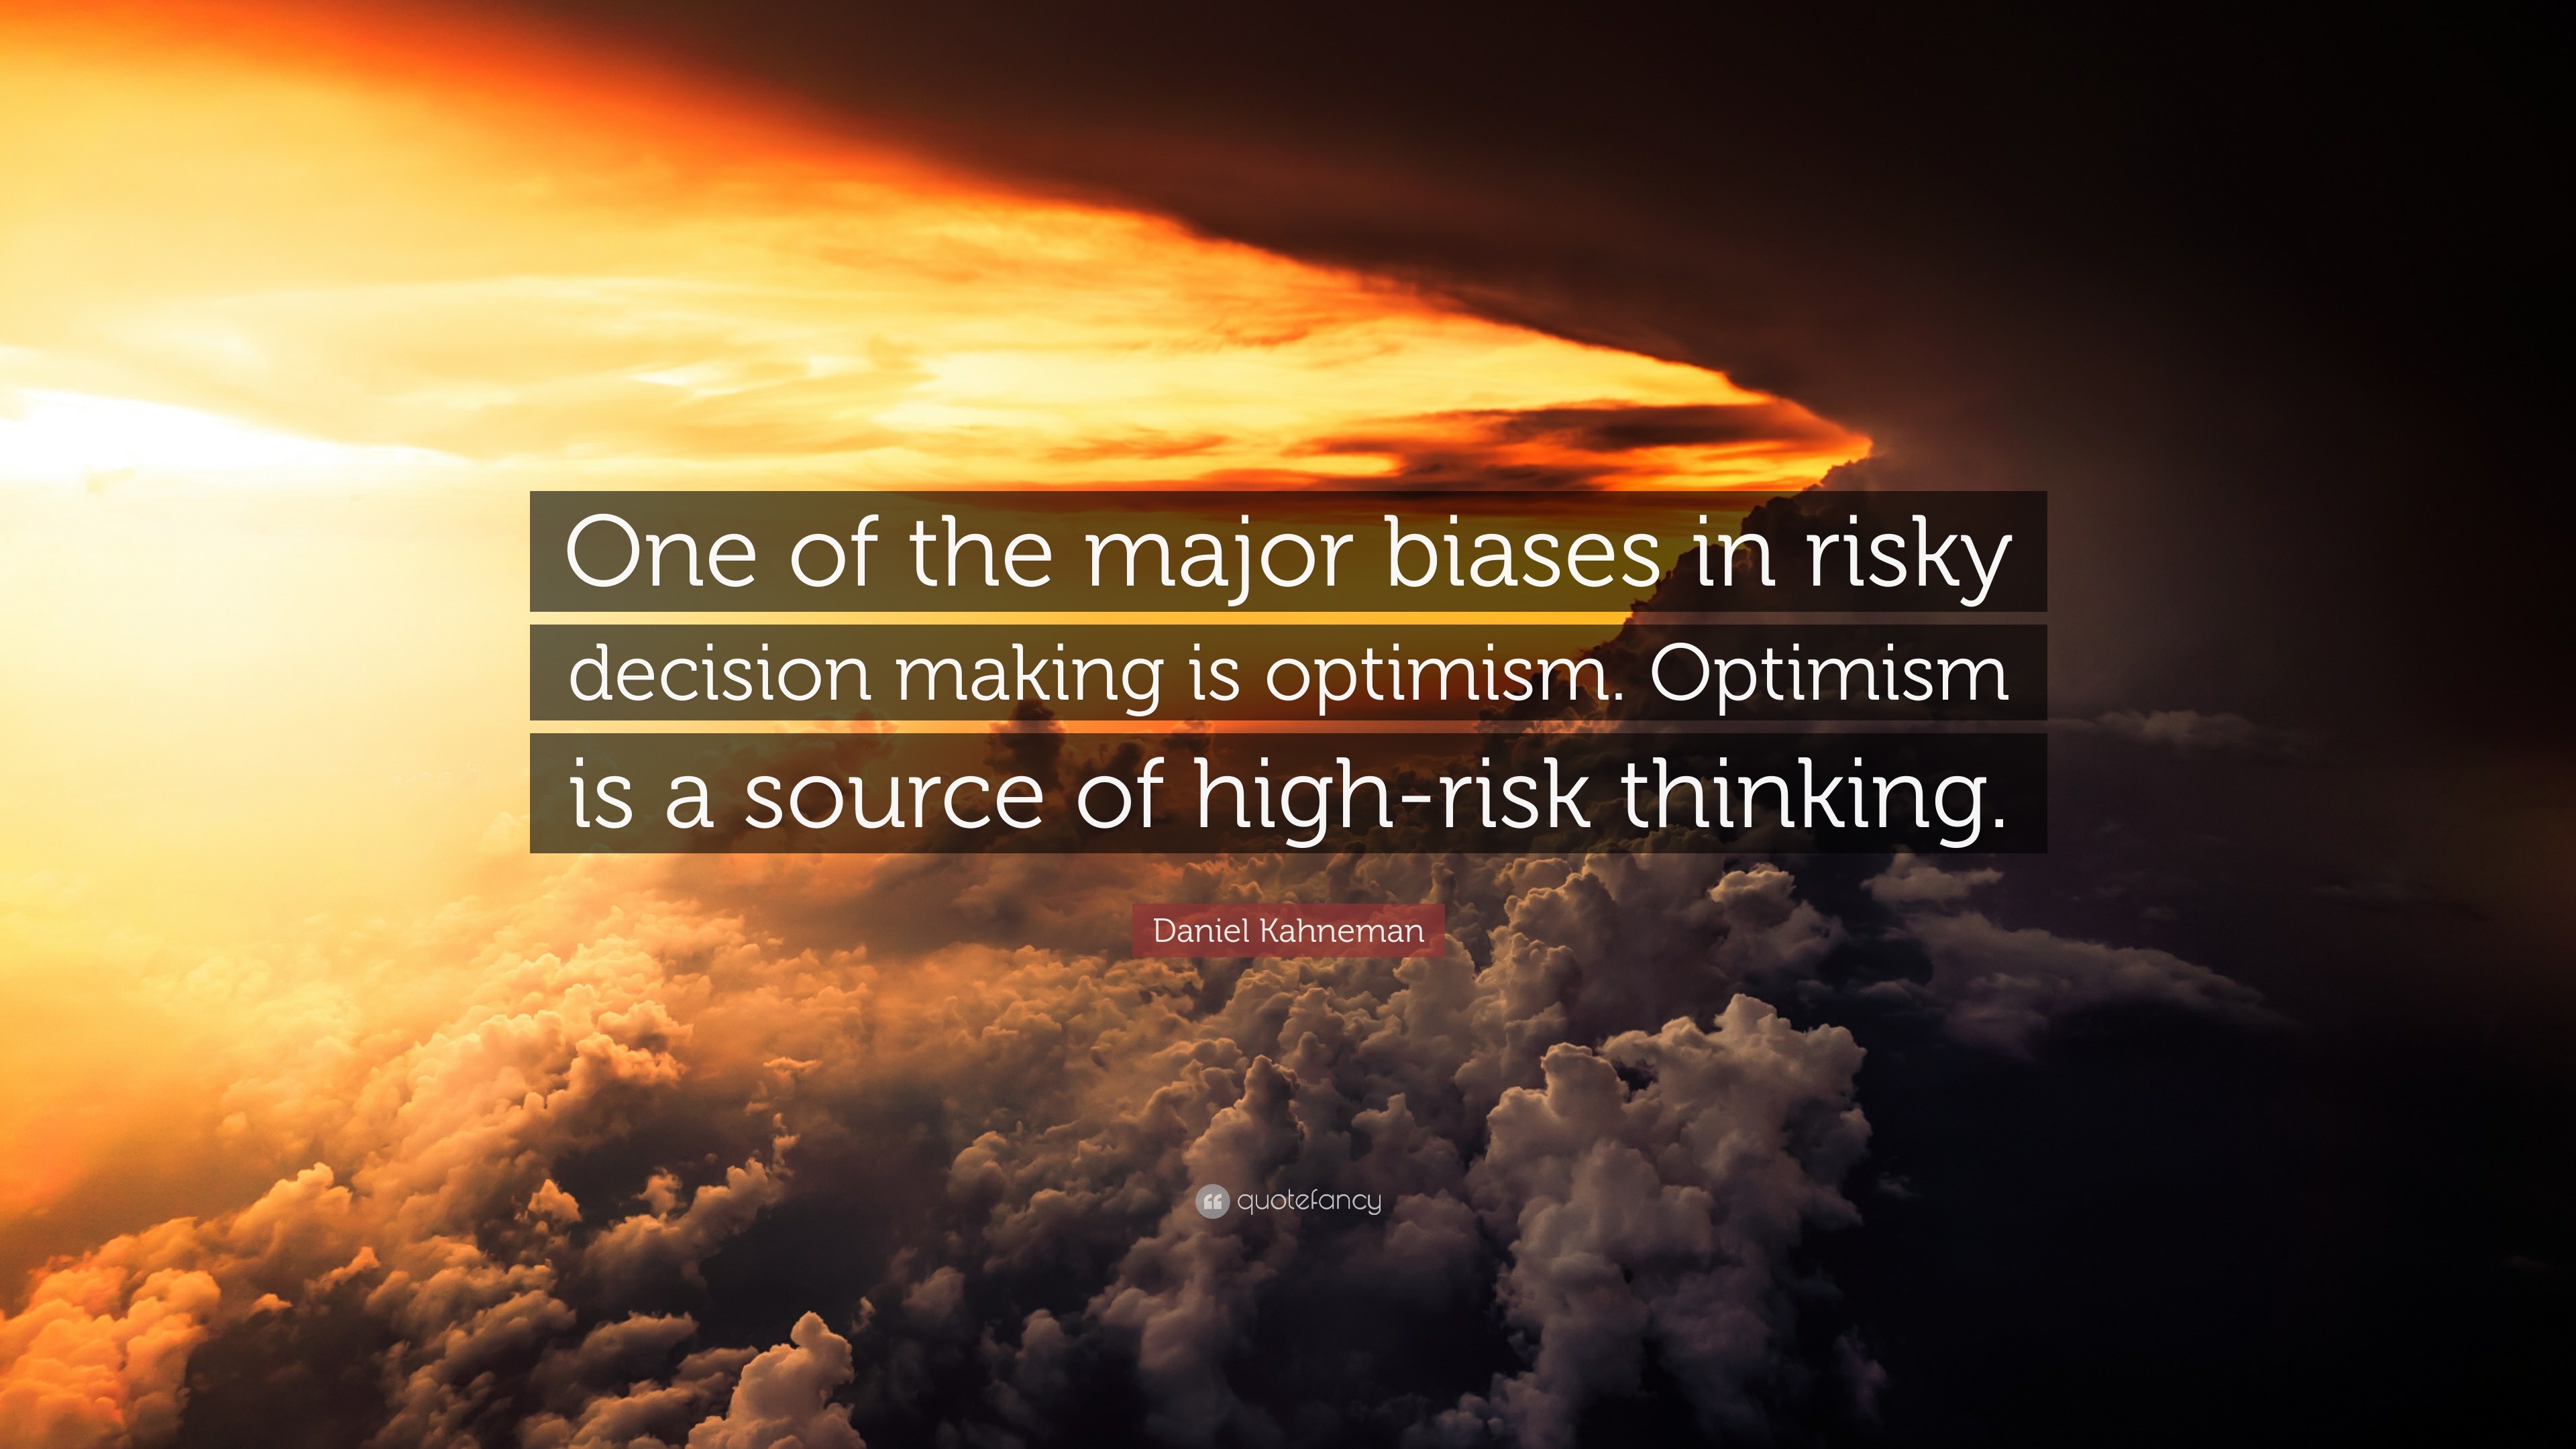 Daniel Kahneman Quote: “One of the major biases in risky decision